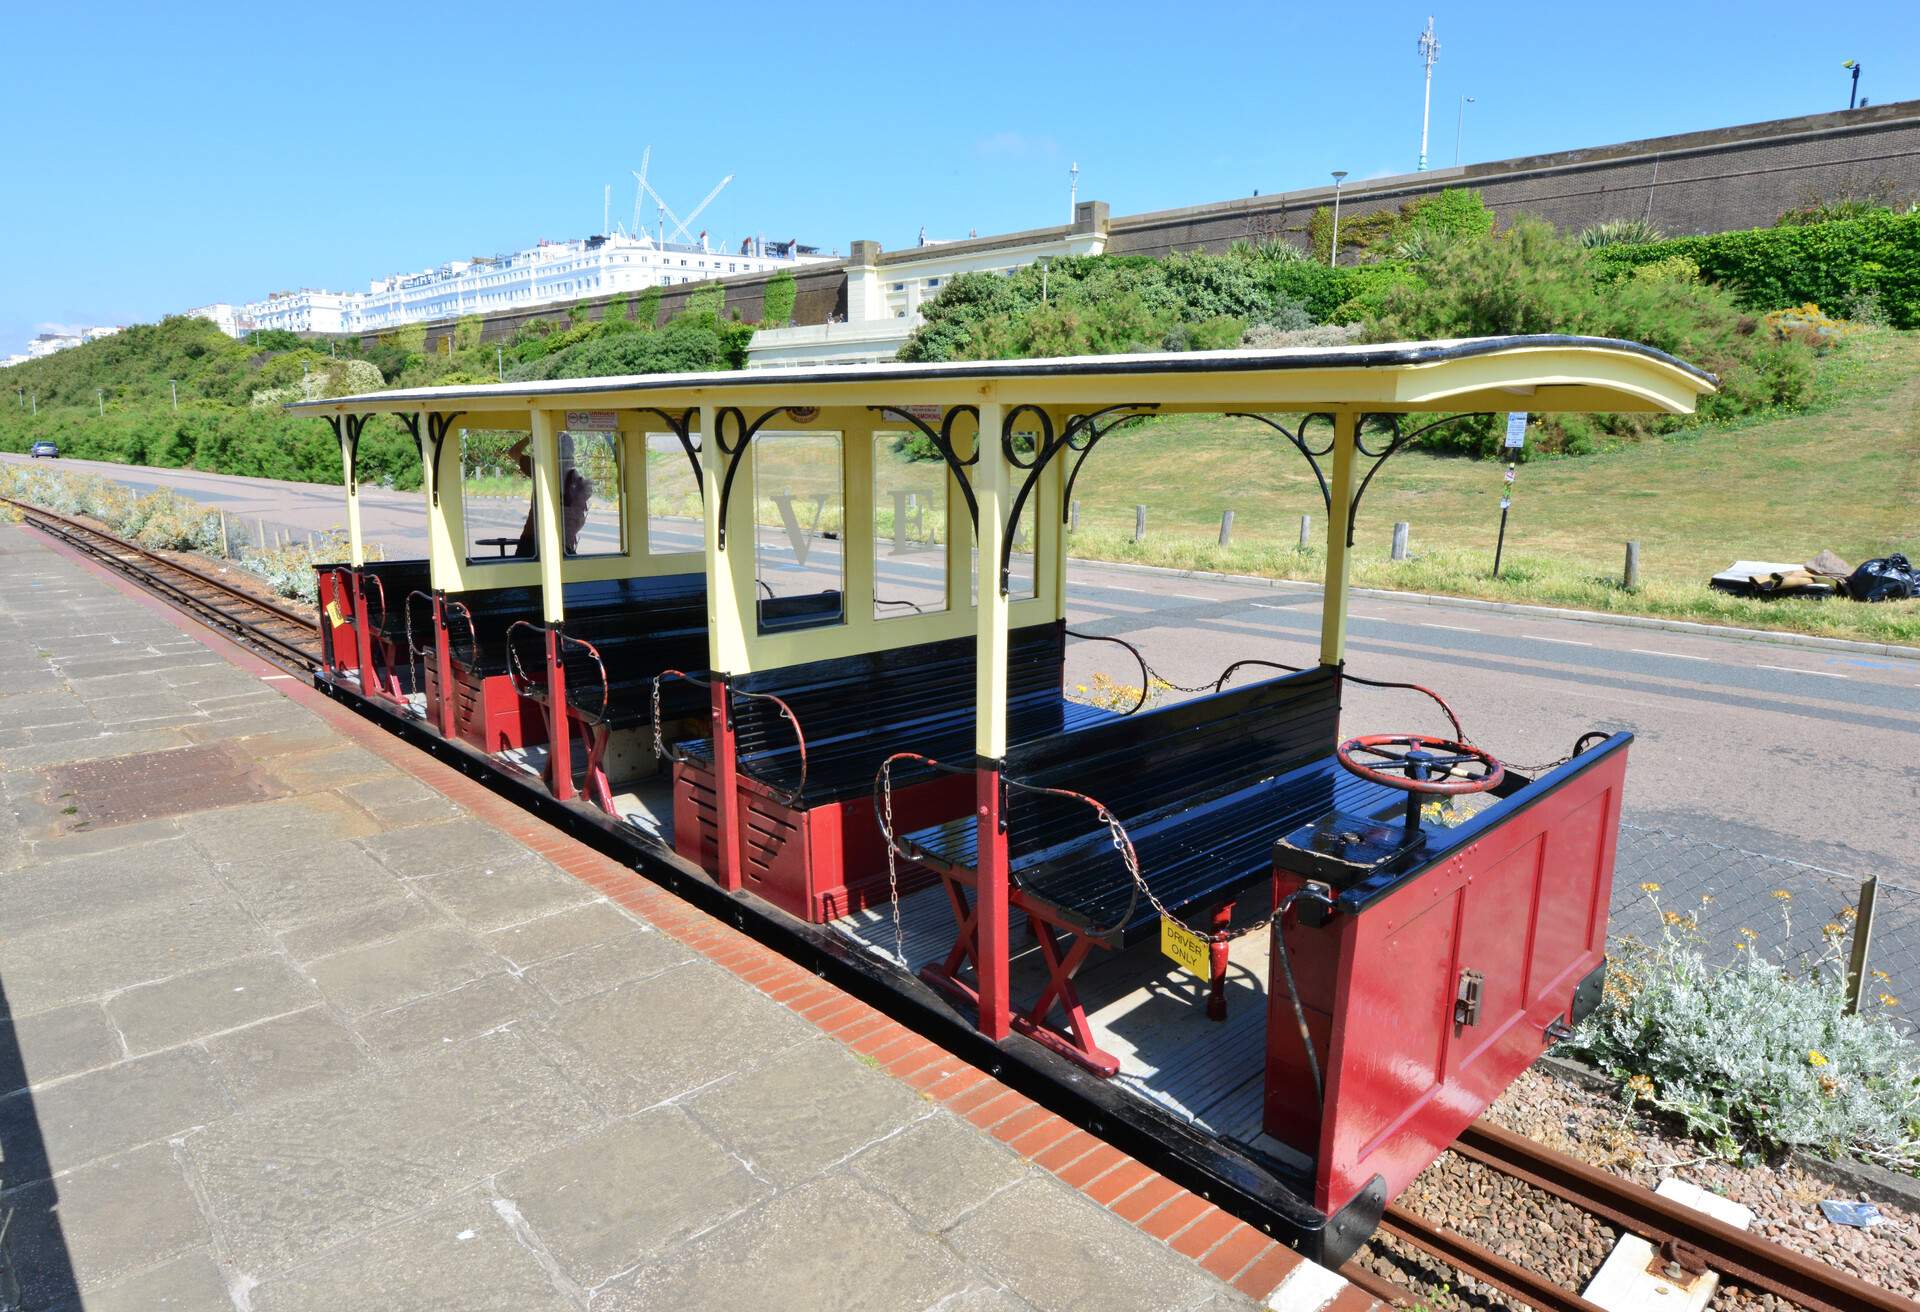 Electric train carriage at Brighton